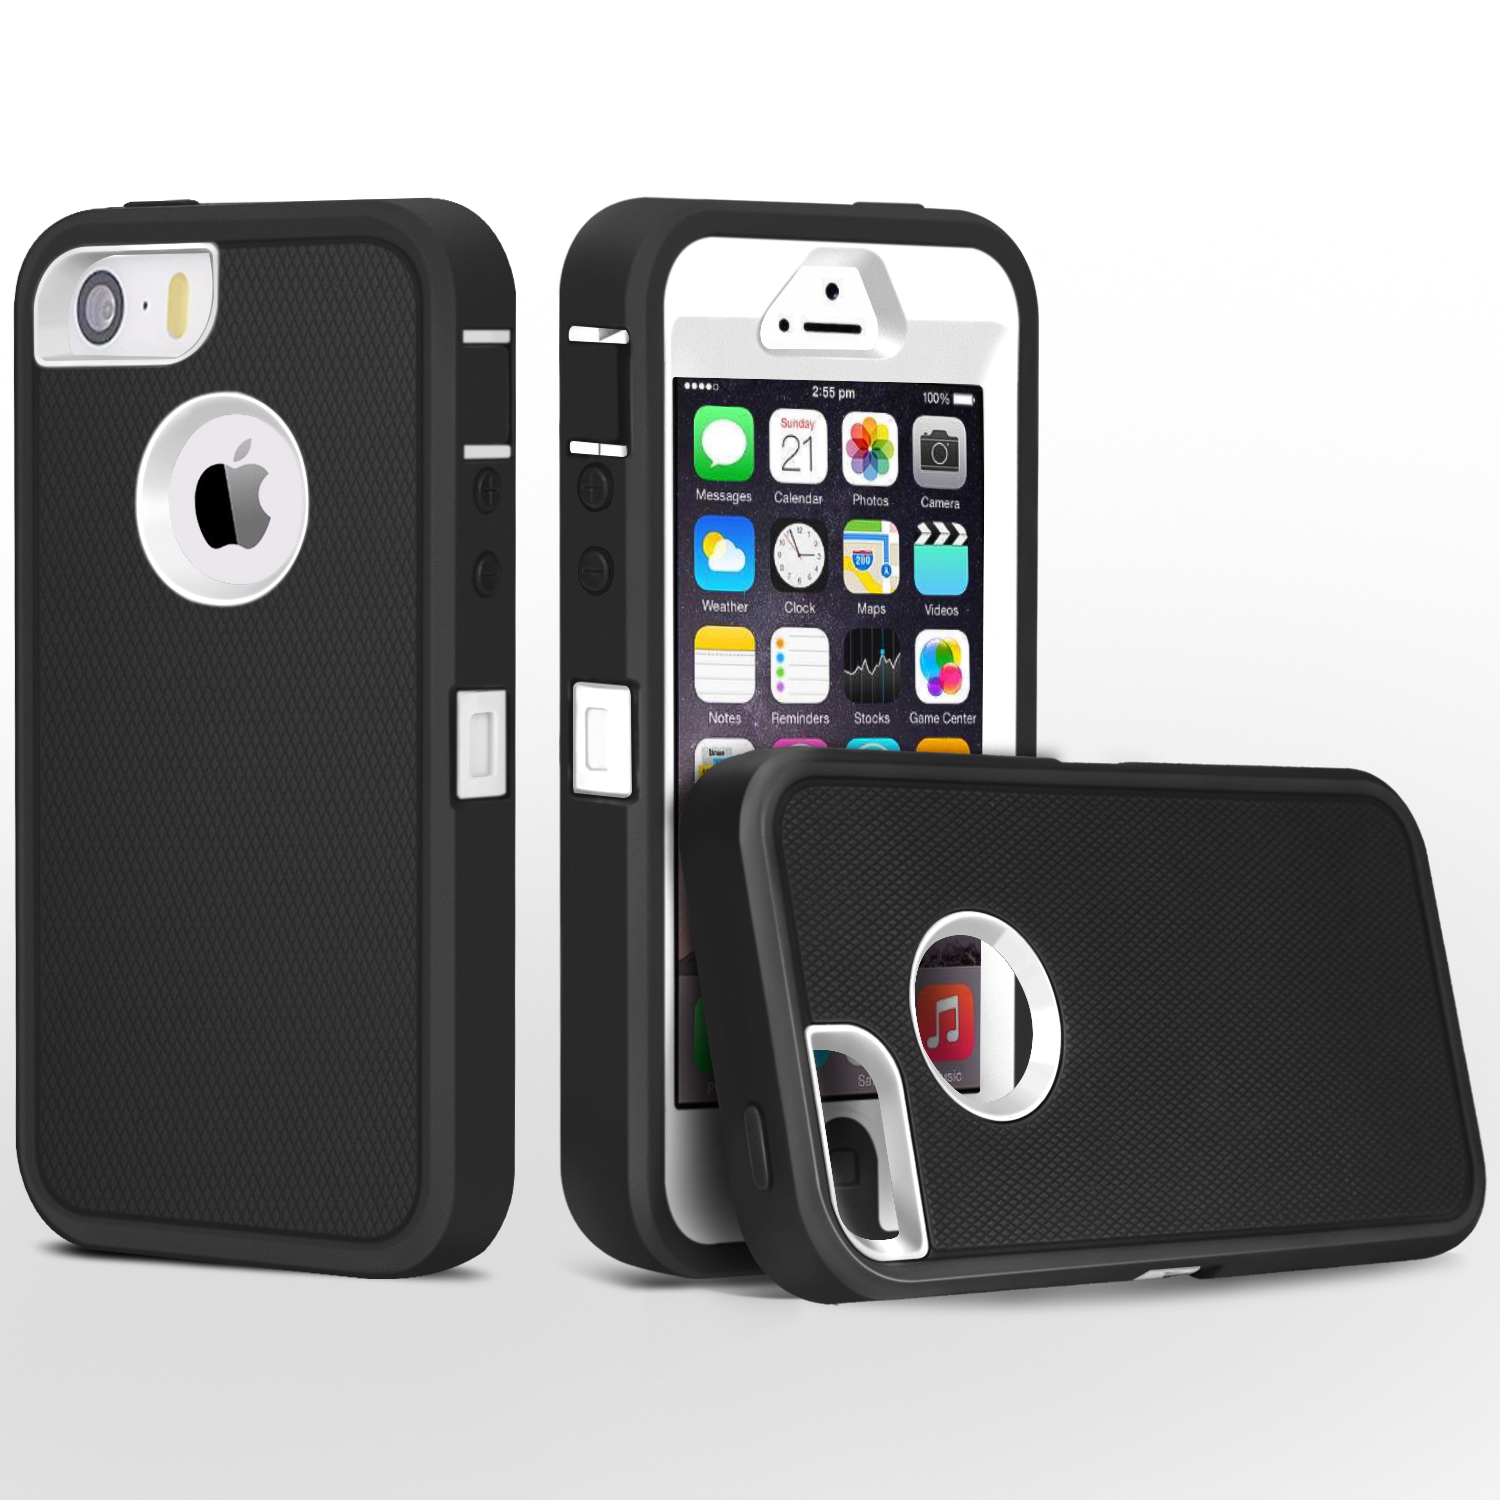 iPhone 5 Case, FogeekHeavy Duty PC + TPU Combo Protective Defender Body Armor Case for iPhone 5 & iPhone 5S(Black/White) …